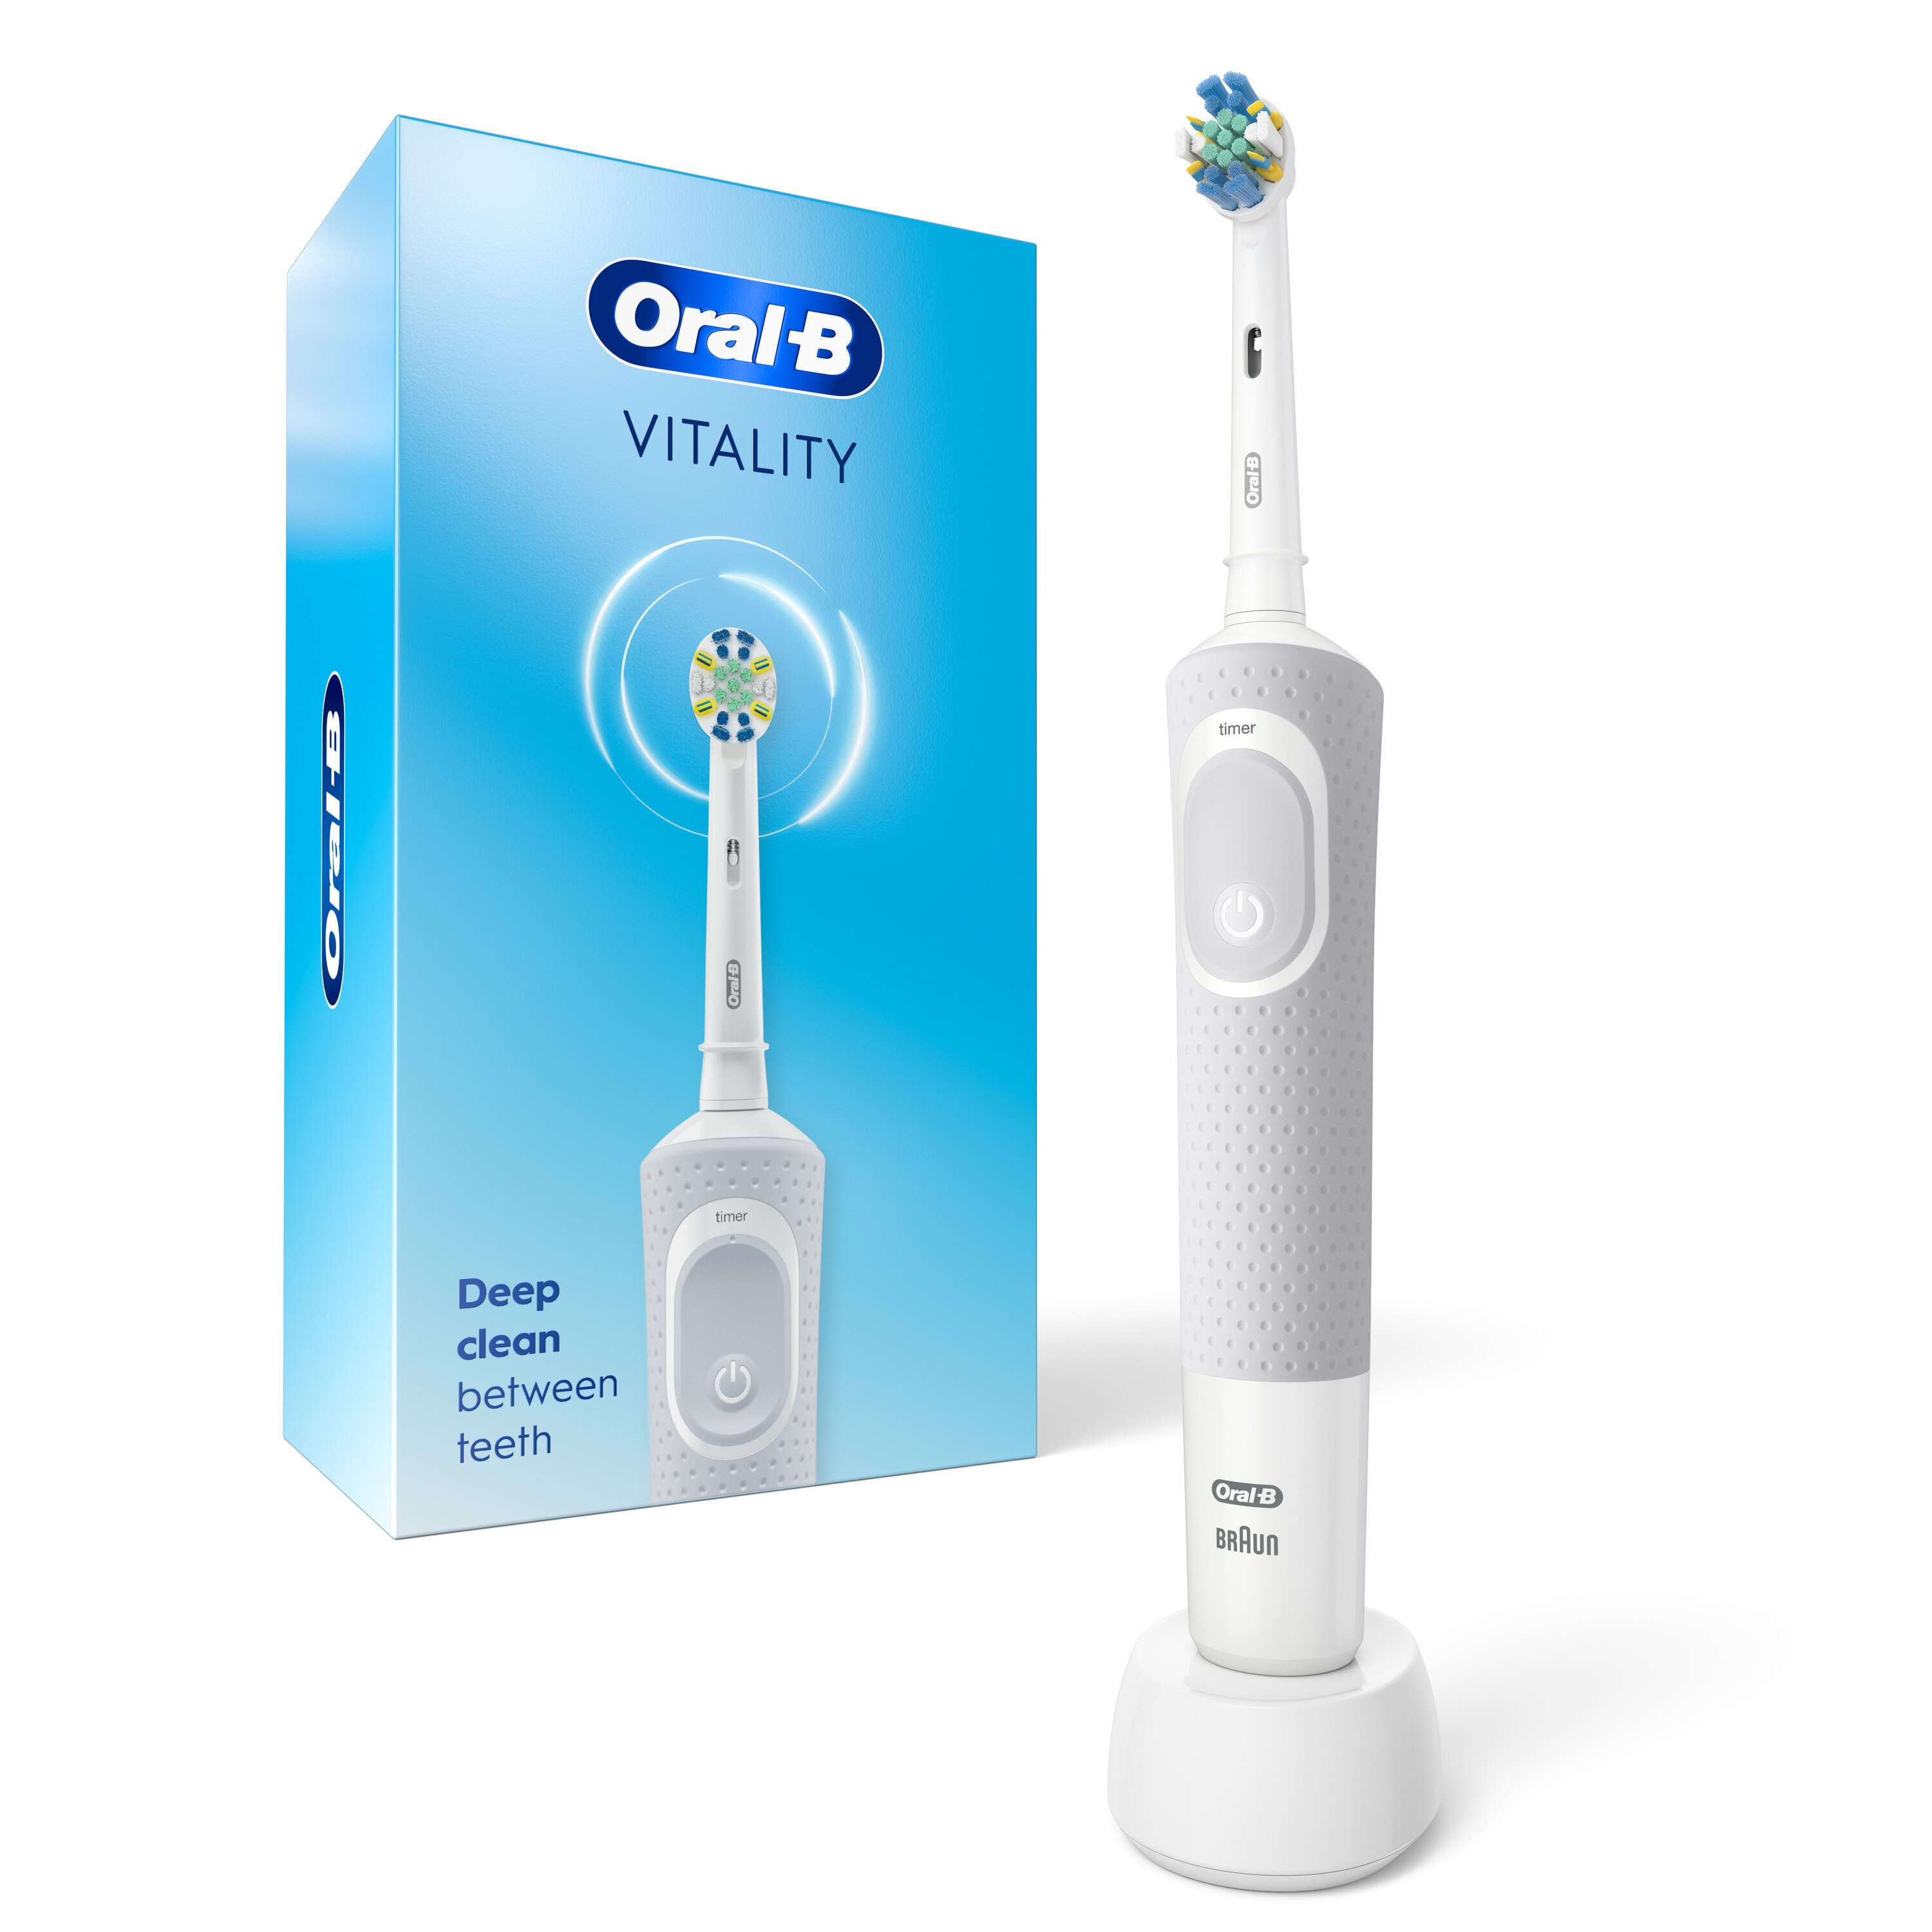 Skole lærer fængsel ugentlig Customer Reviews: Oral-B Vitality FlossAction Electric Rechargeable  Toothbrush, powered by Braun - CVS Pharmacy